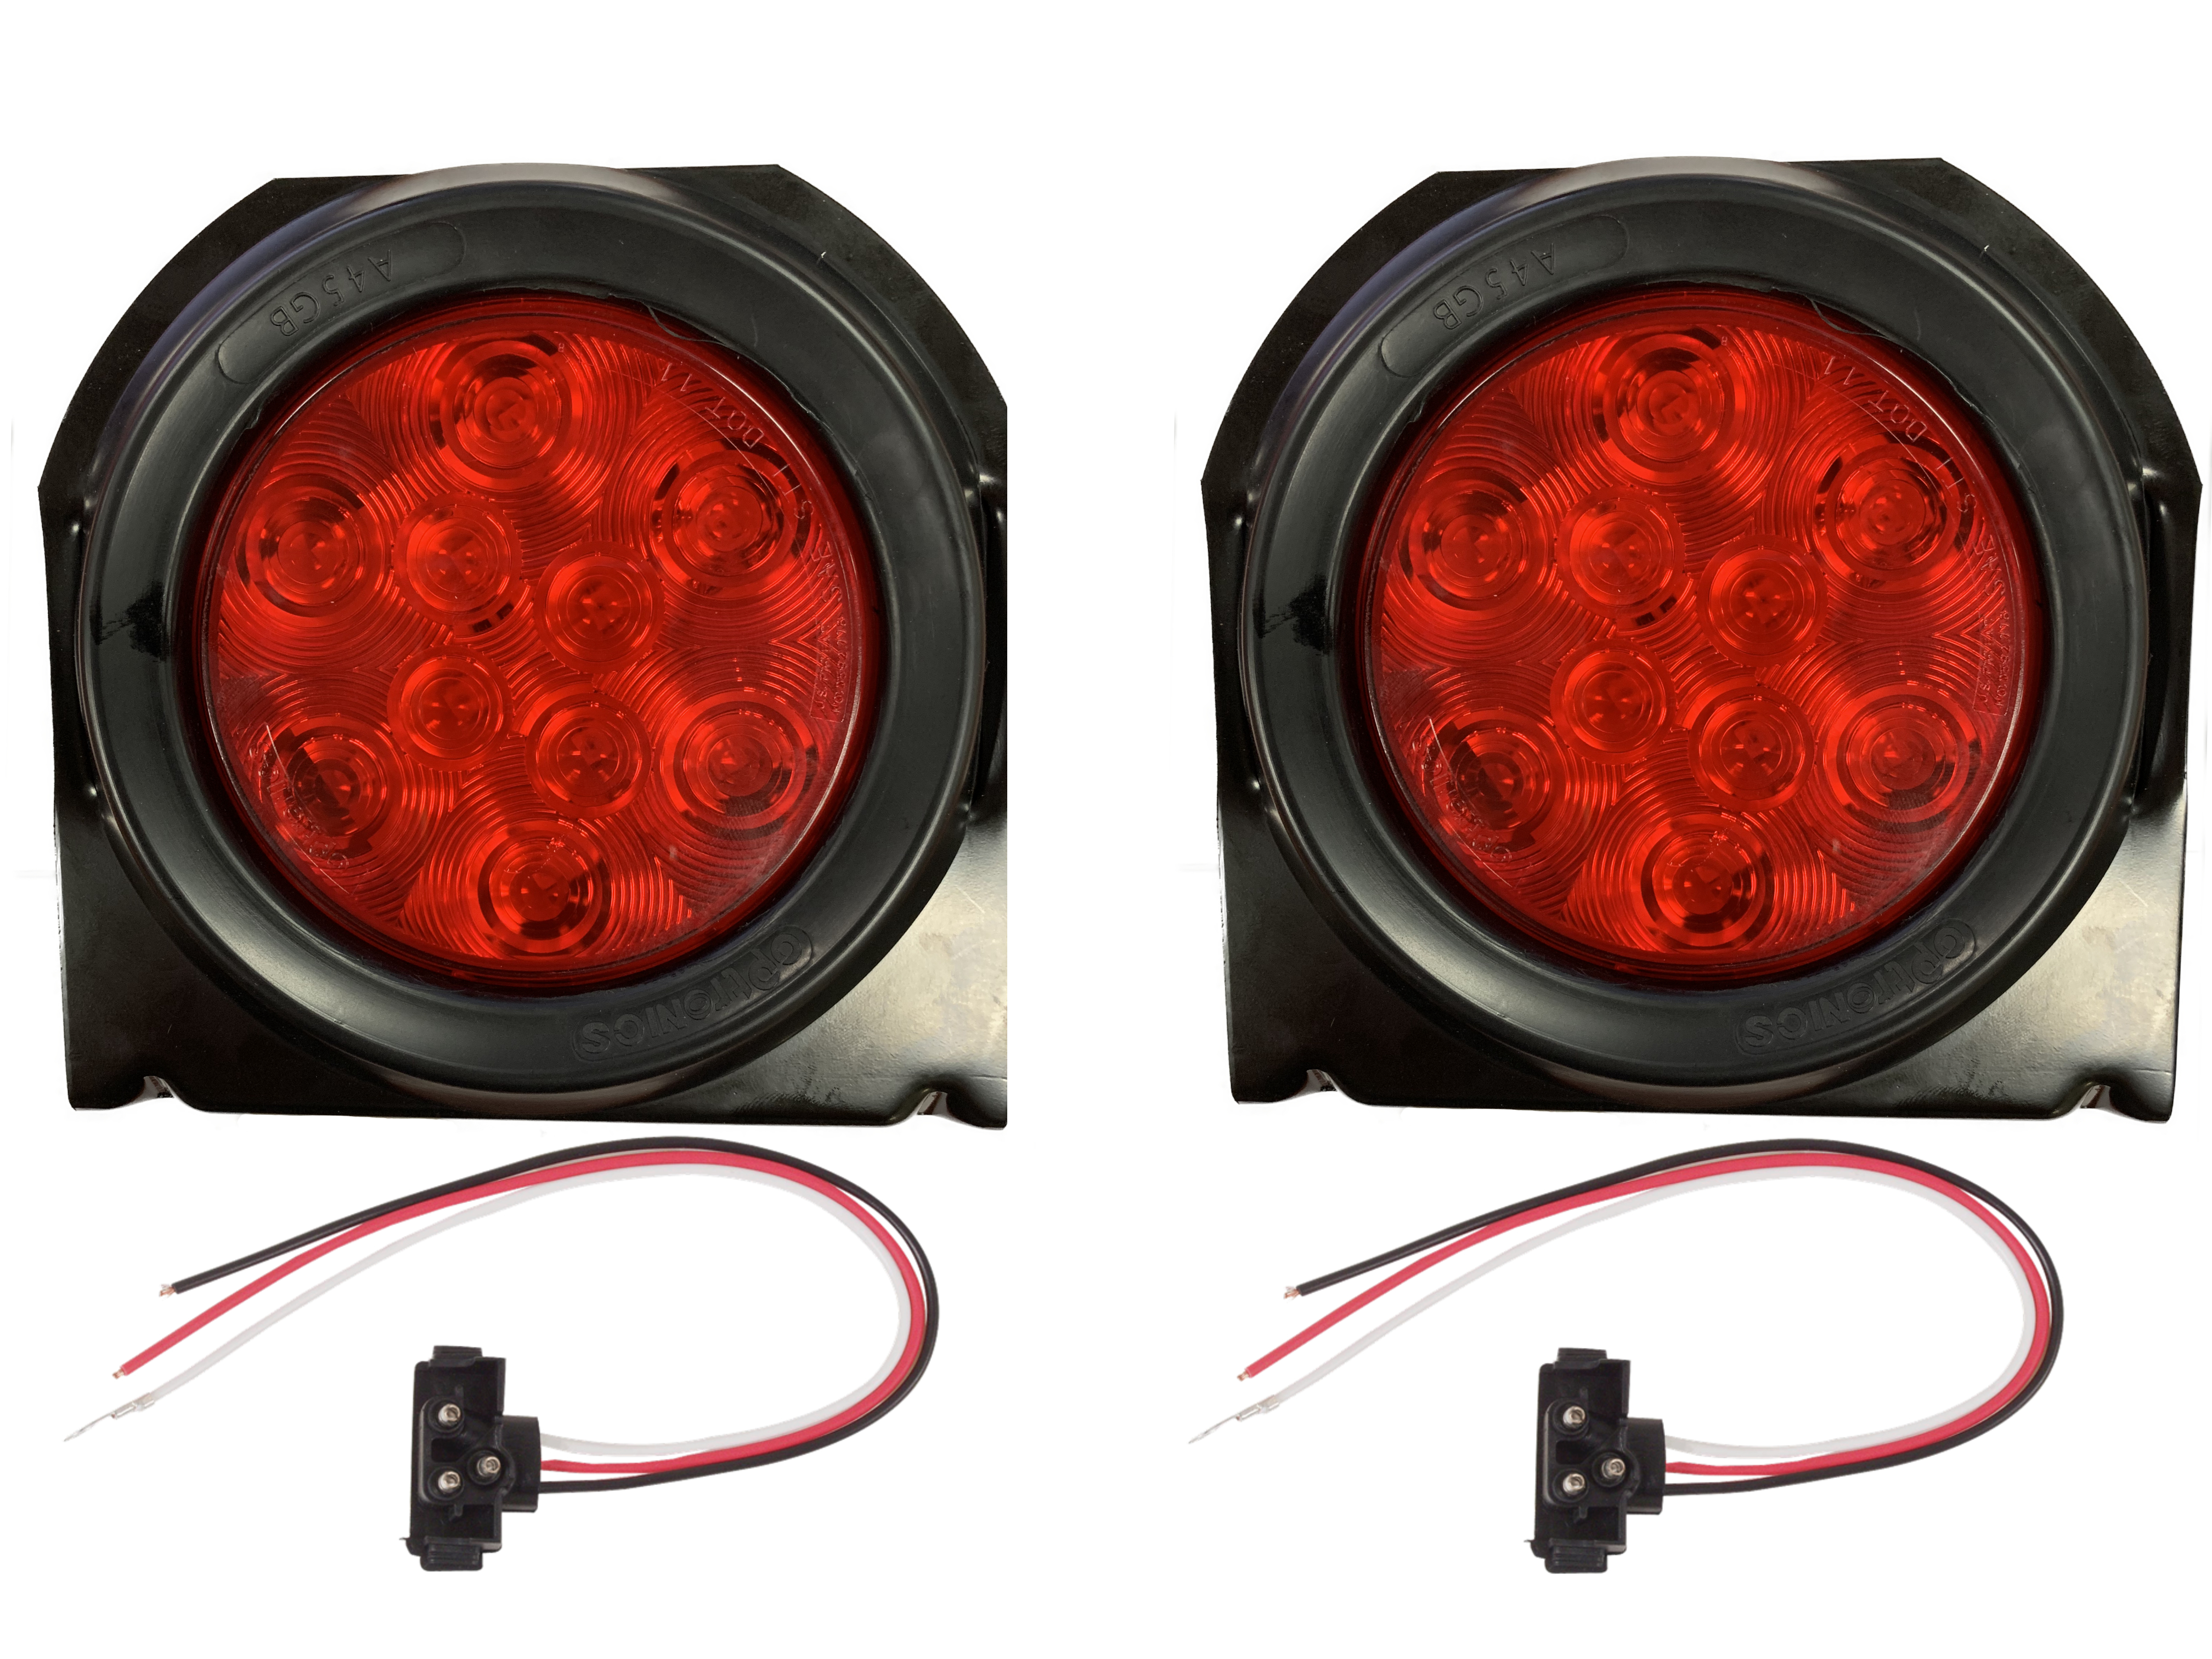 2) Red 10 LED 4″ Round Truck Trailer Brake Stop Turn Tail Lights